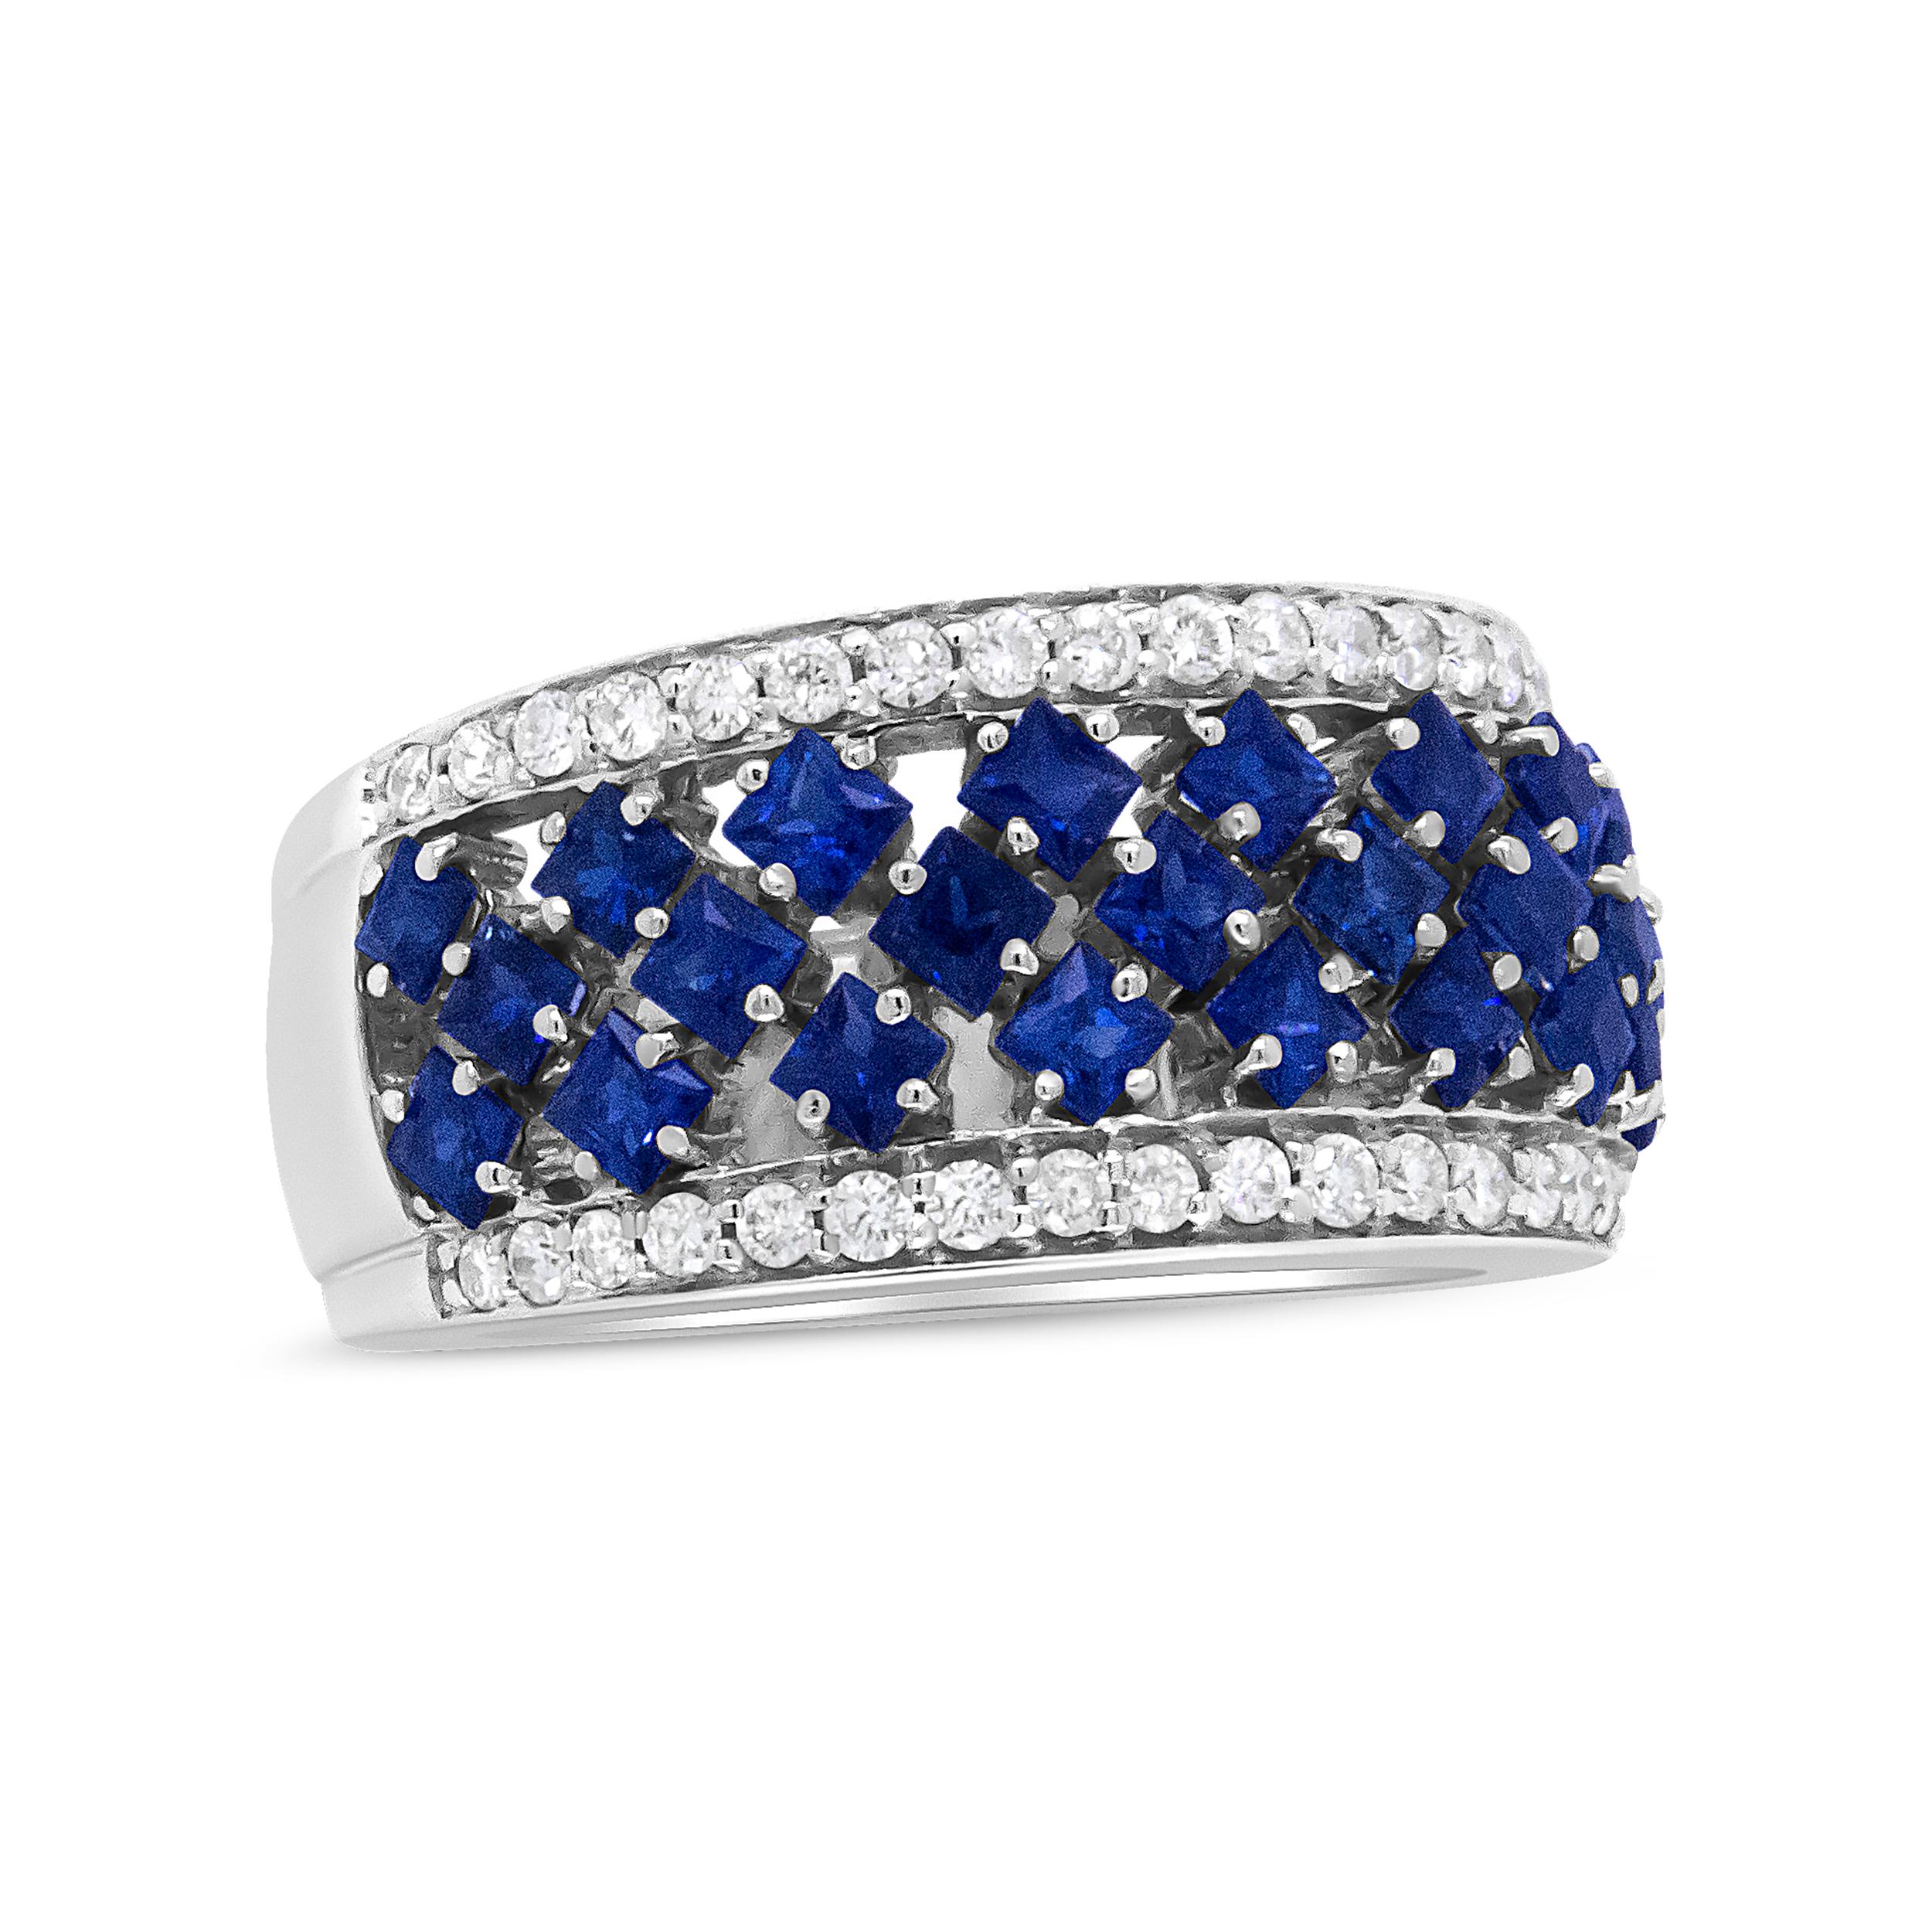 Crafted in genuine 18k white gold, this luxury fashion ring is elegant and refined in sparkling delight. Twenty-six 2x2mm princess-cut color-treated blue sapphires provide a rich color that stands out alongside the round white diamonds that frame